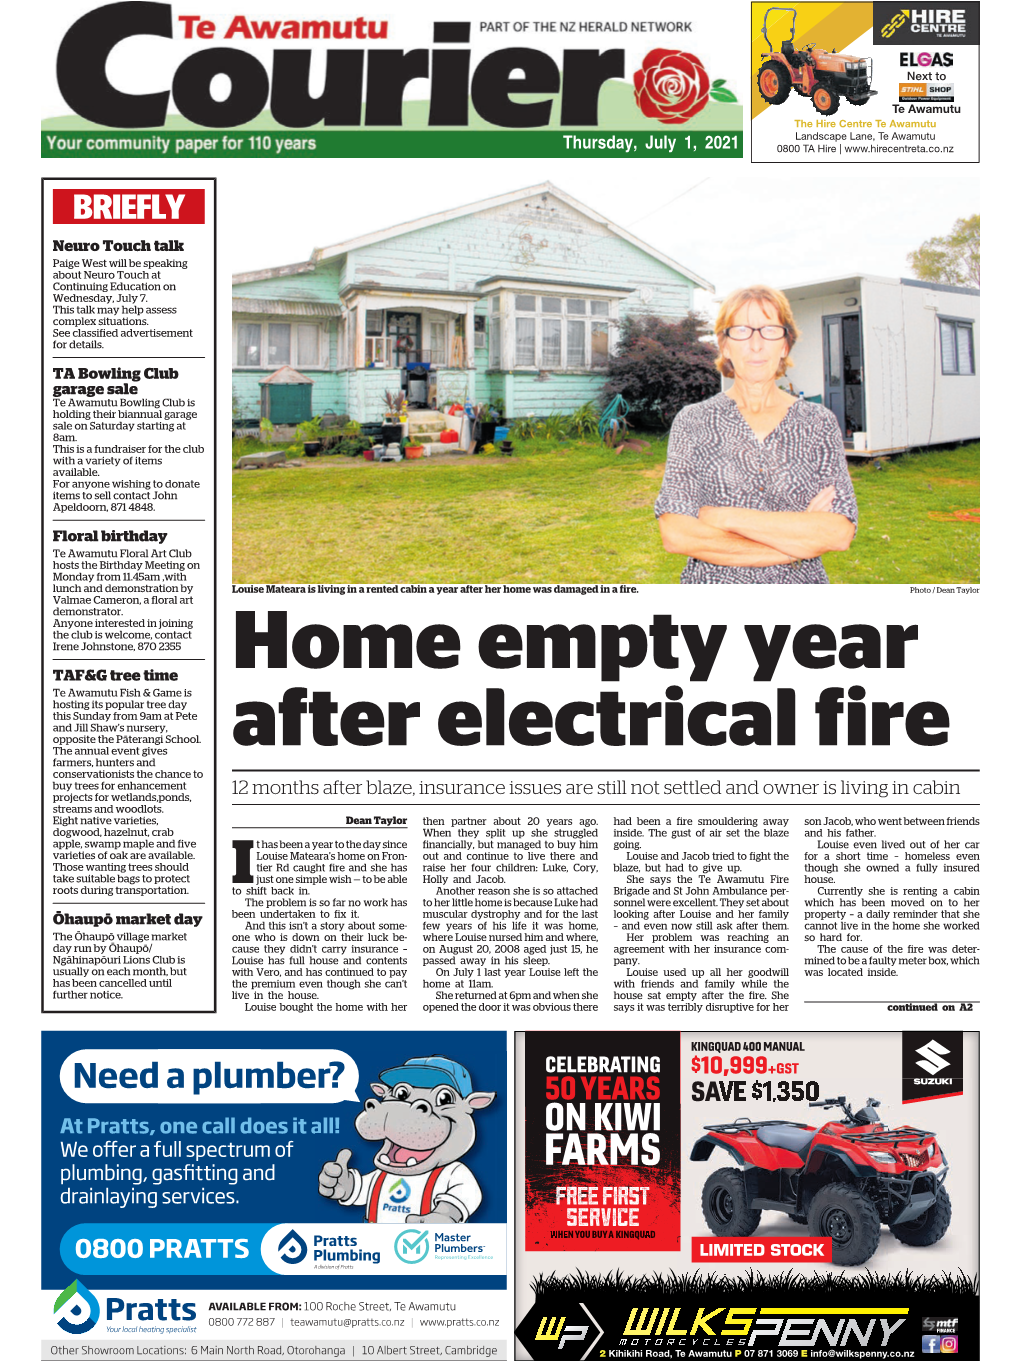 Te Awamutu Courier Thursday, July 1, 2021 Owner Just Wants to Live in Own Home